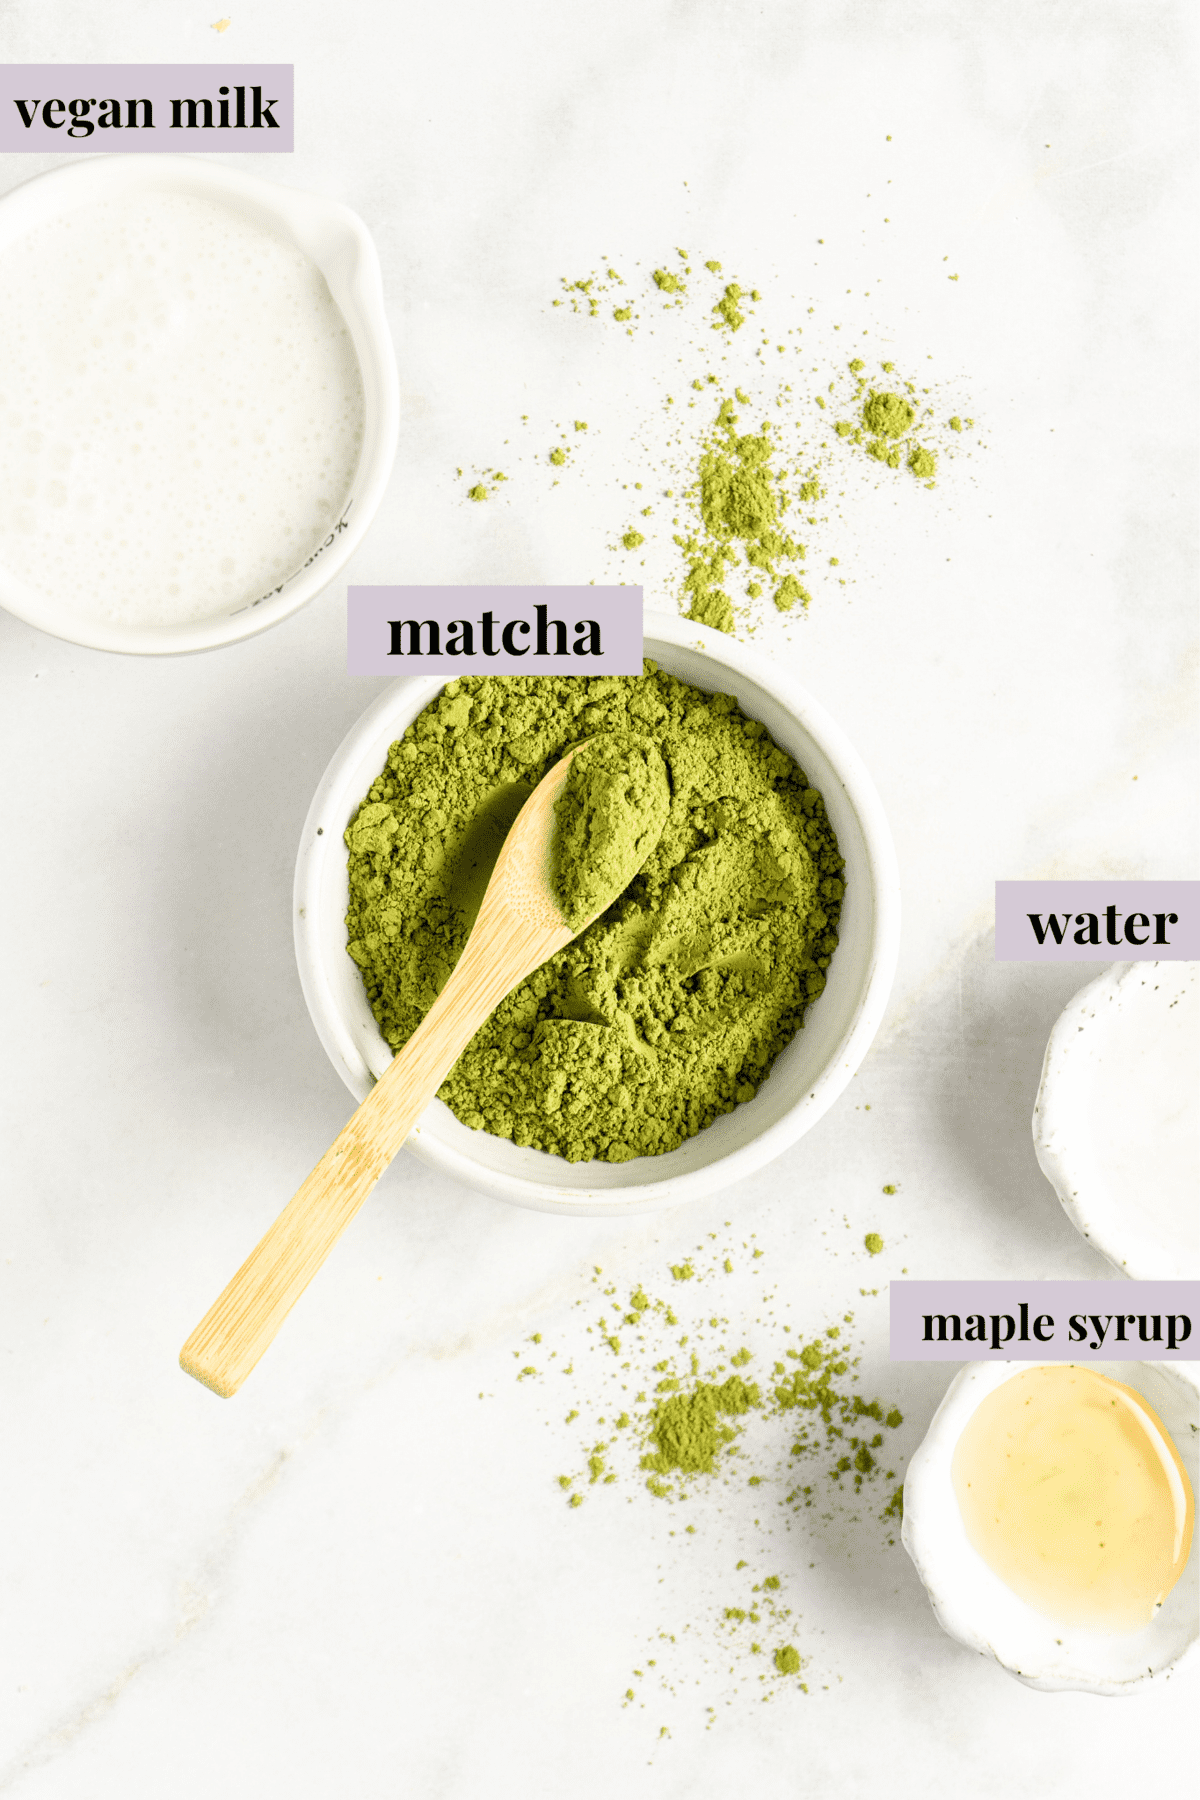 Small bowl of matcha powder with wooden spoon